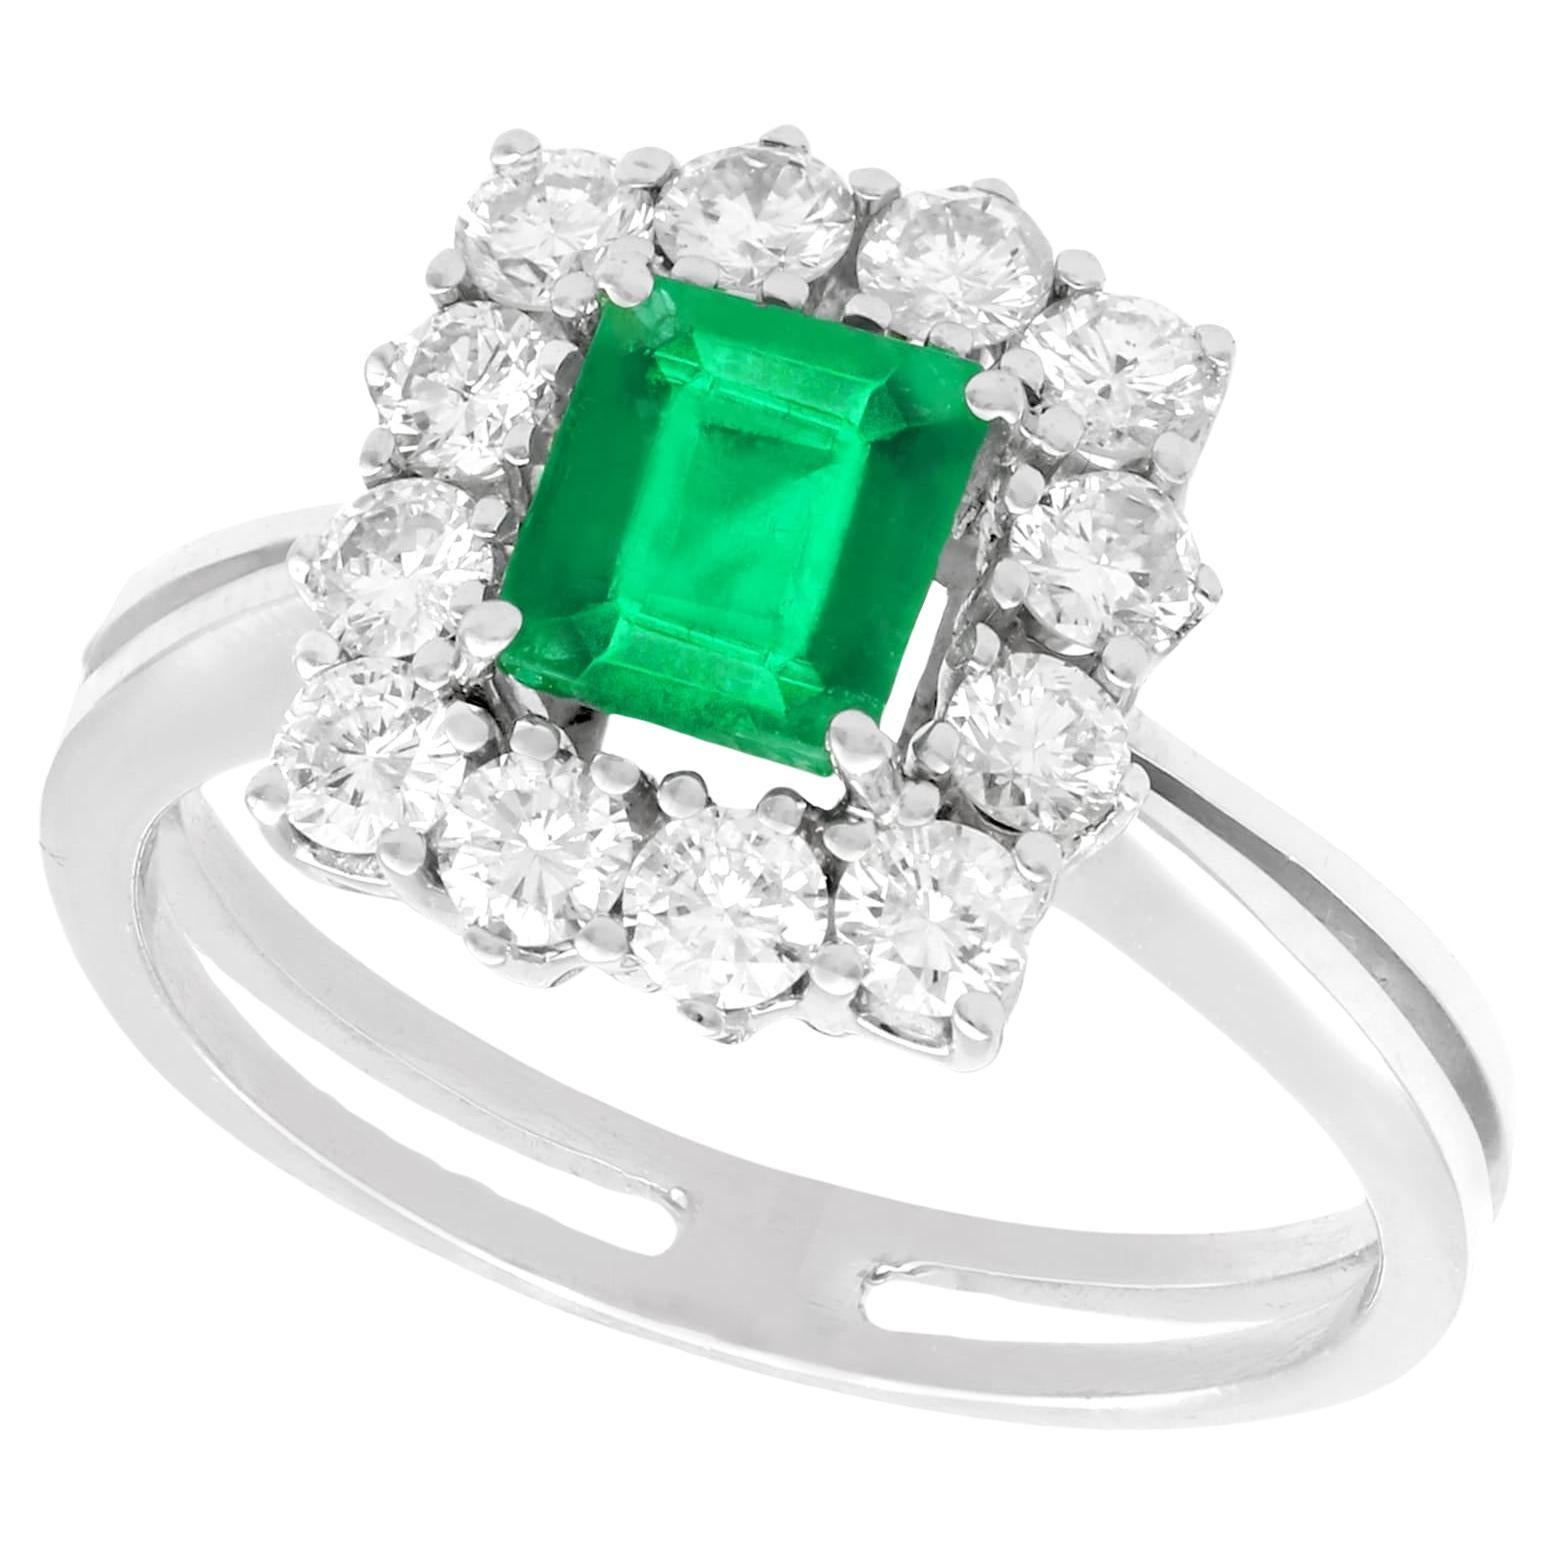 Emerald Cut Emerald and Diamond White Gold Cluster Ring